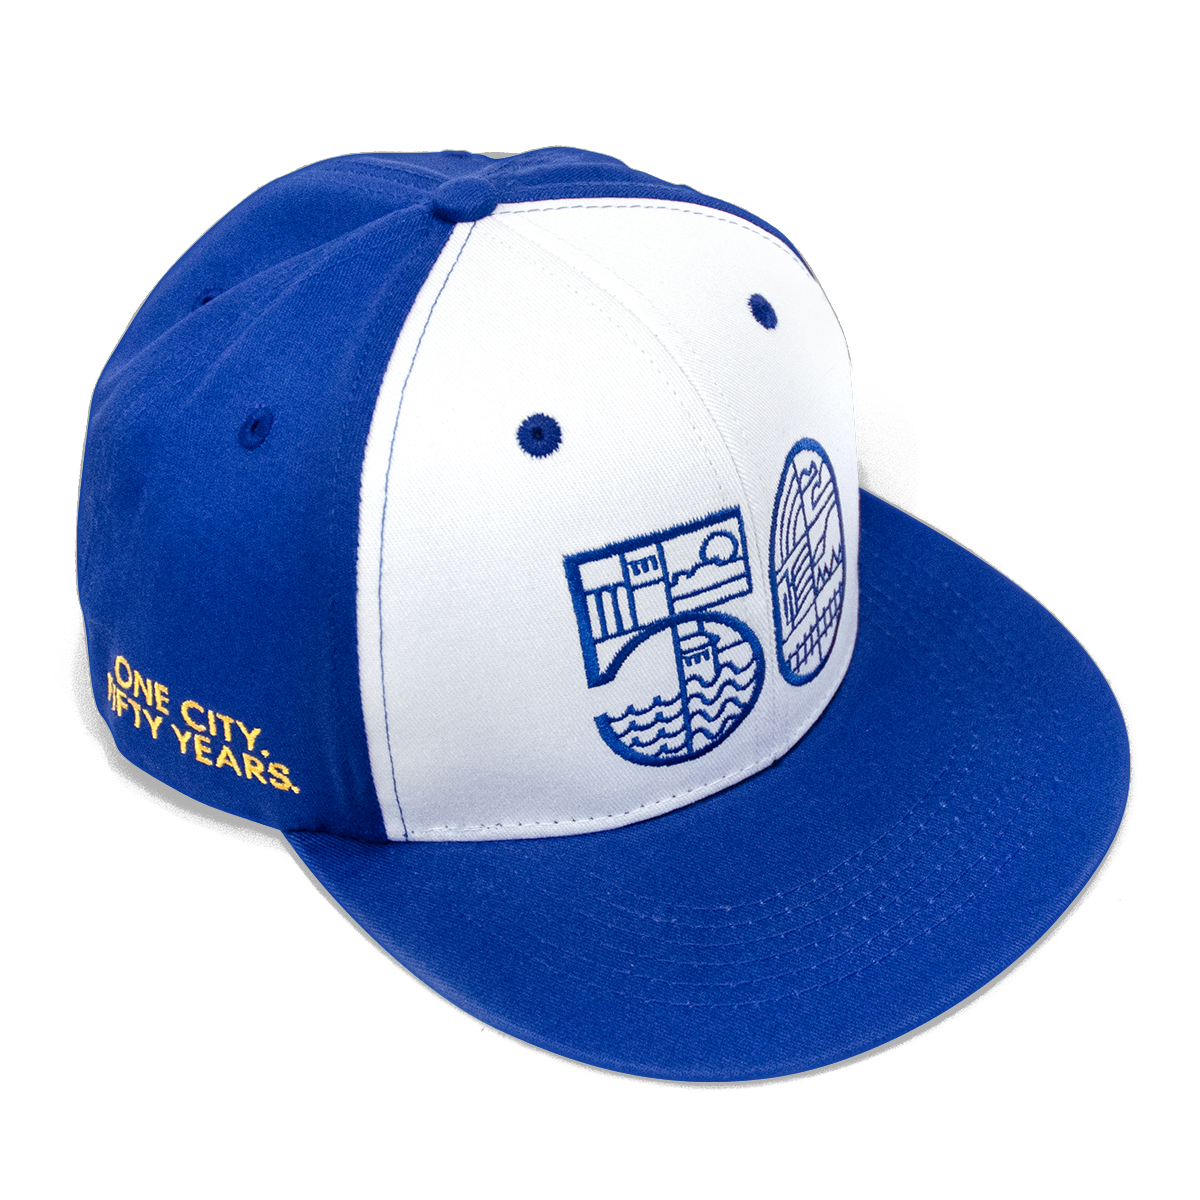 Lost Art Canada - blue one city snapback hat front view